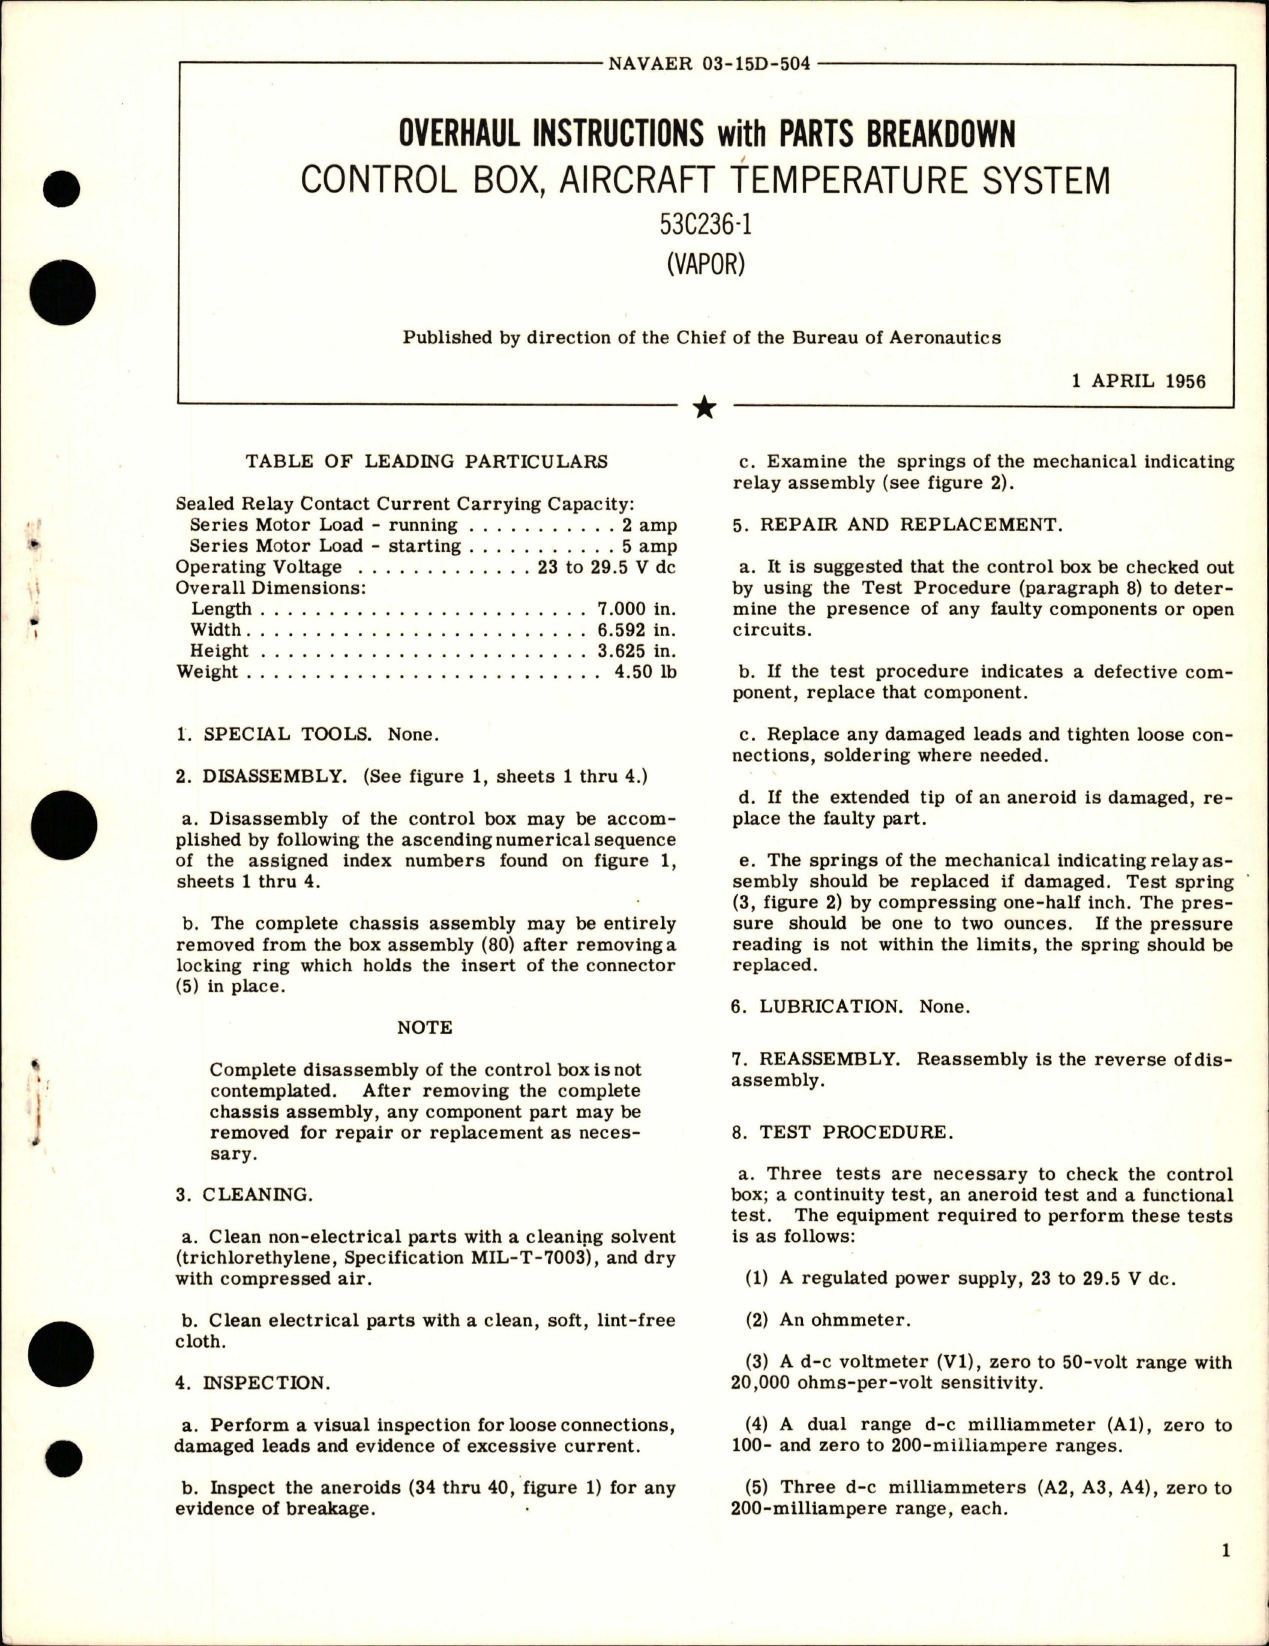 Sample page 1 from AirCorps Library document: Overhaul Instructions with Parts for Aircraft Temperature System Control Box - 53C236-1